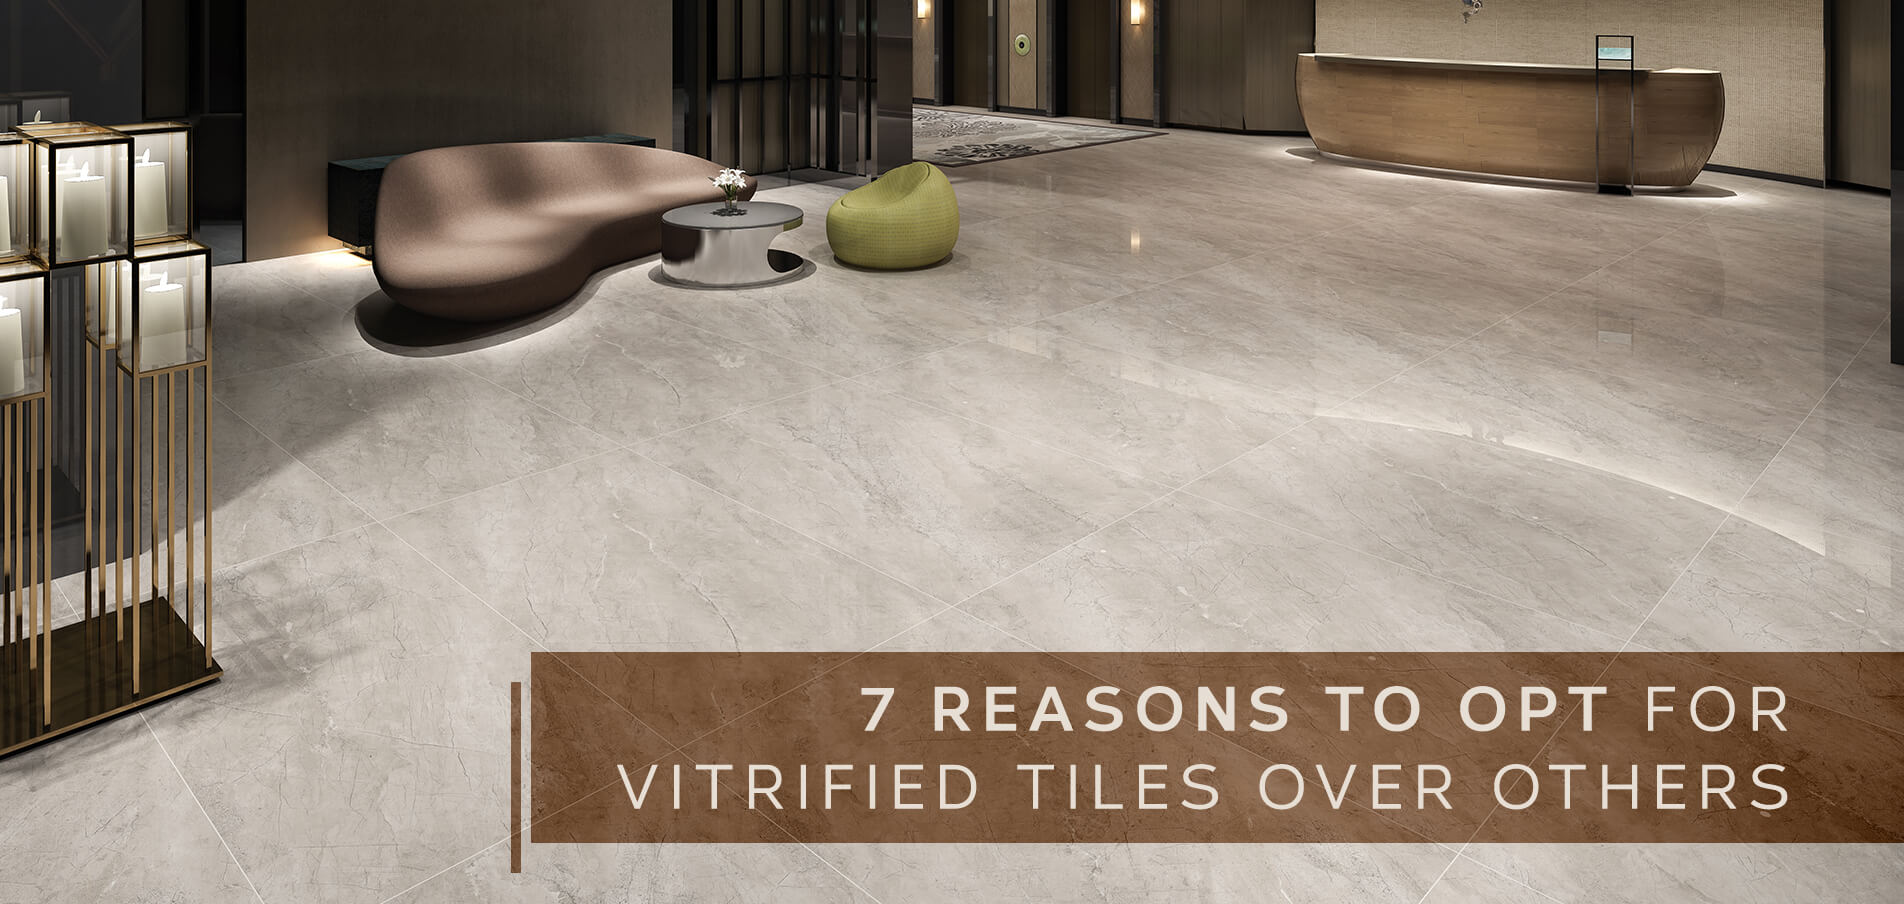 7 Reasons To Opt For Vitrified Tiles Over Others by Simpolo